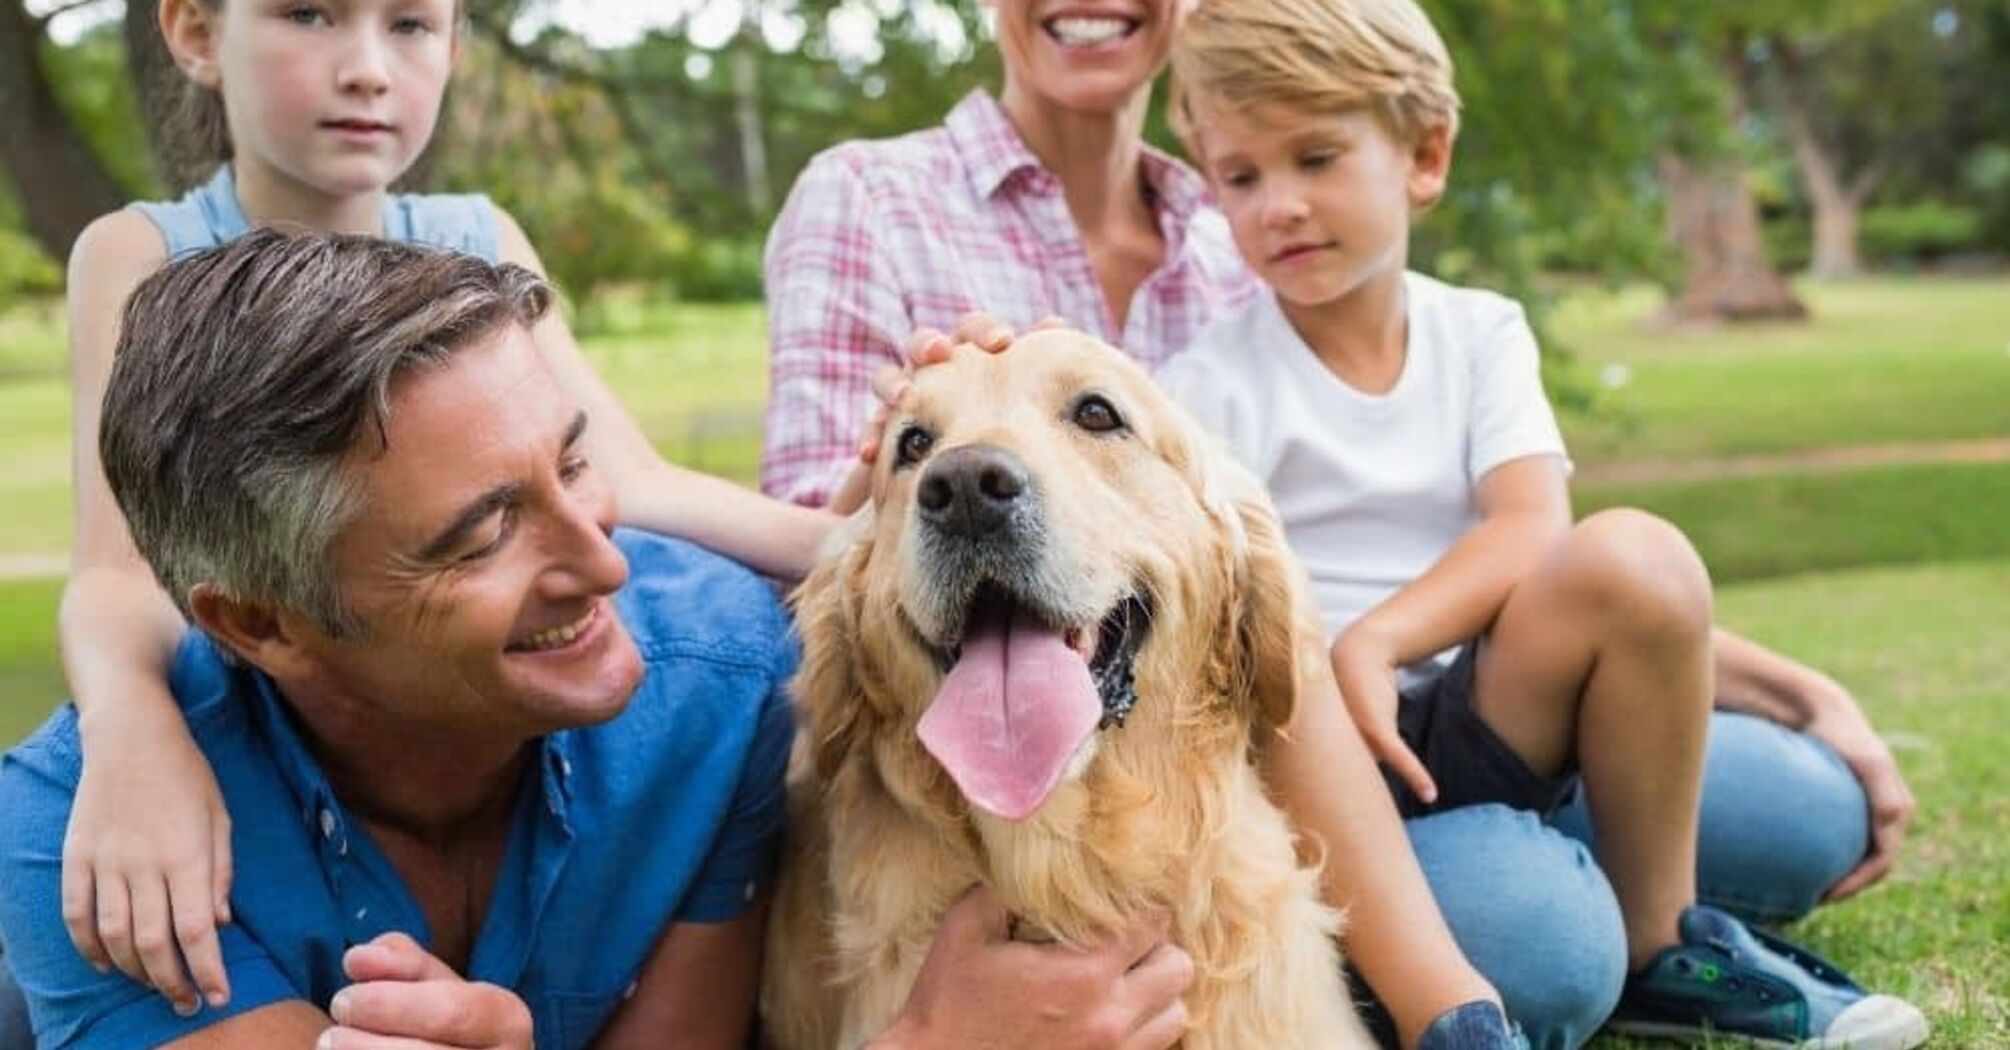 How to choose the right dog for your family